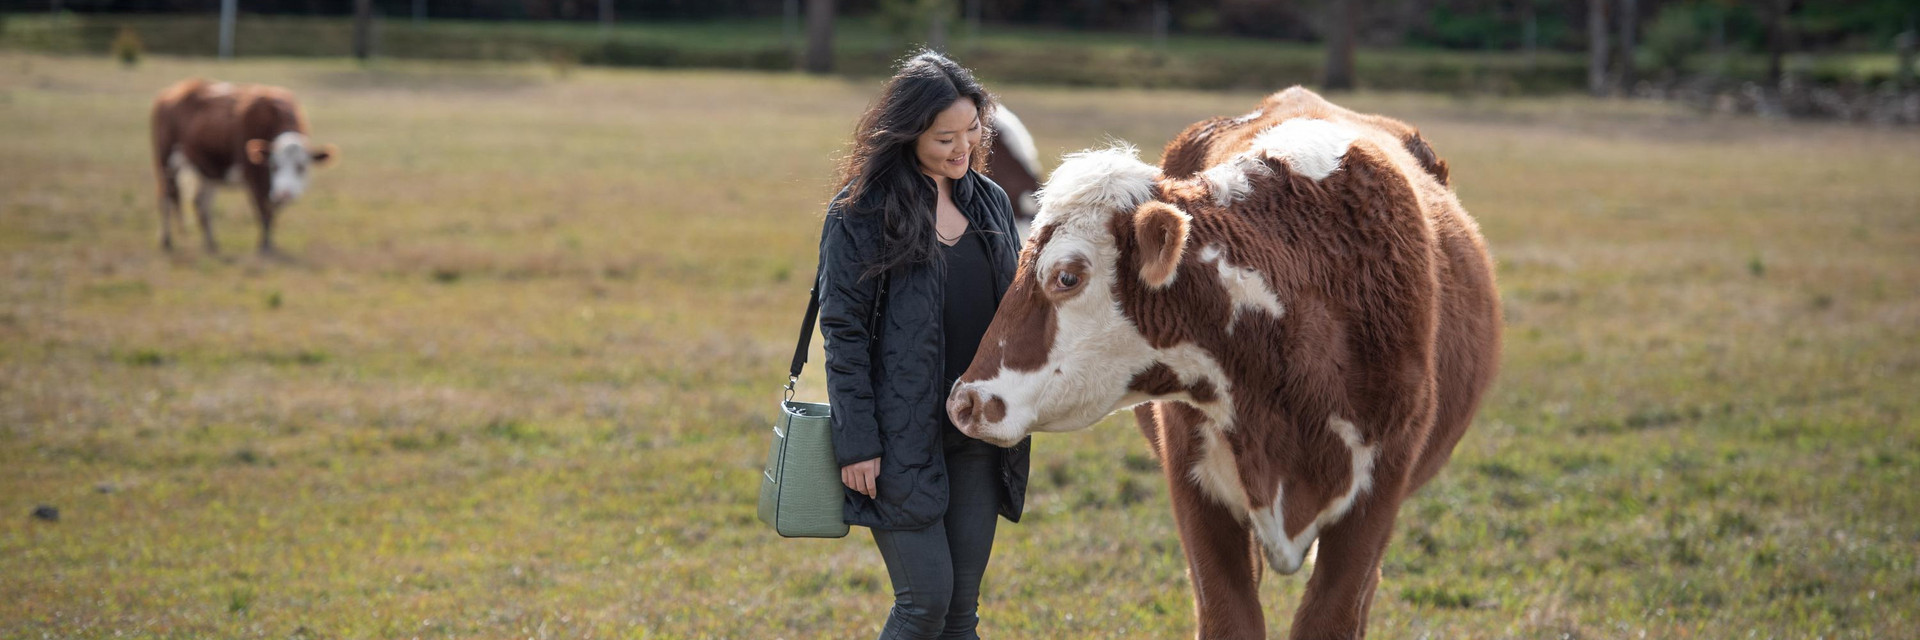 Woman with a rescued cow